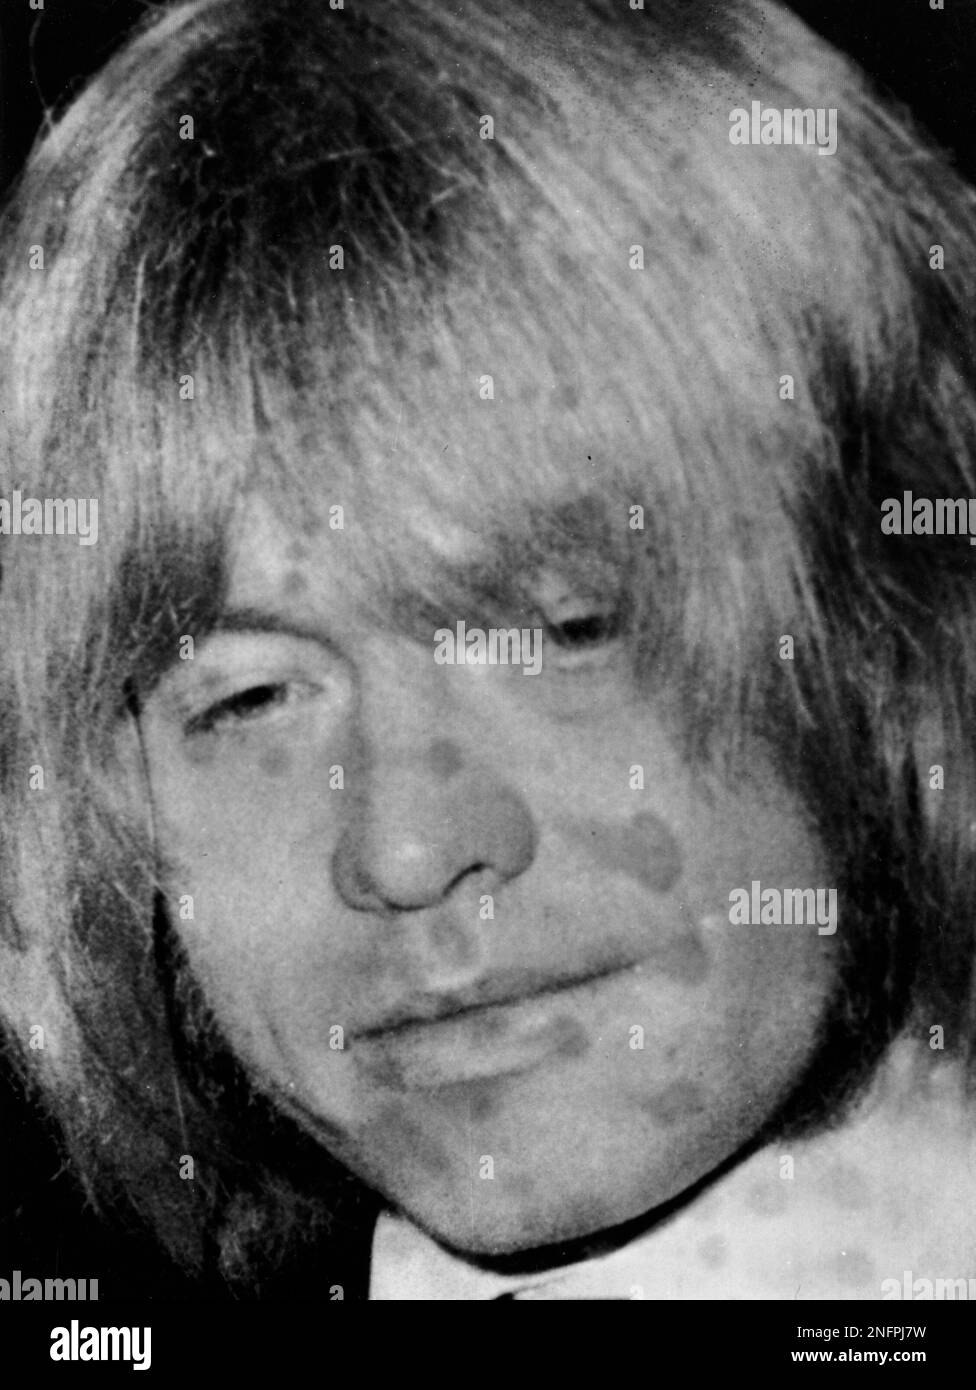 Portrait of Brian Jones, (February 28, 1942 - July 3, 1969), guitarist of  the Rock Band "The Rolling Stones", looks beat up with spots and marks on  his face as he appeared